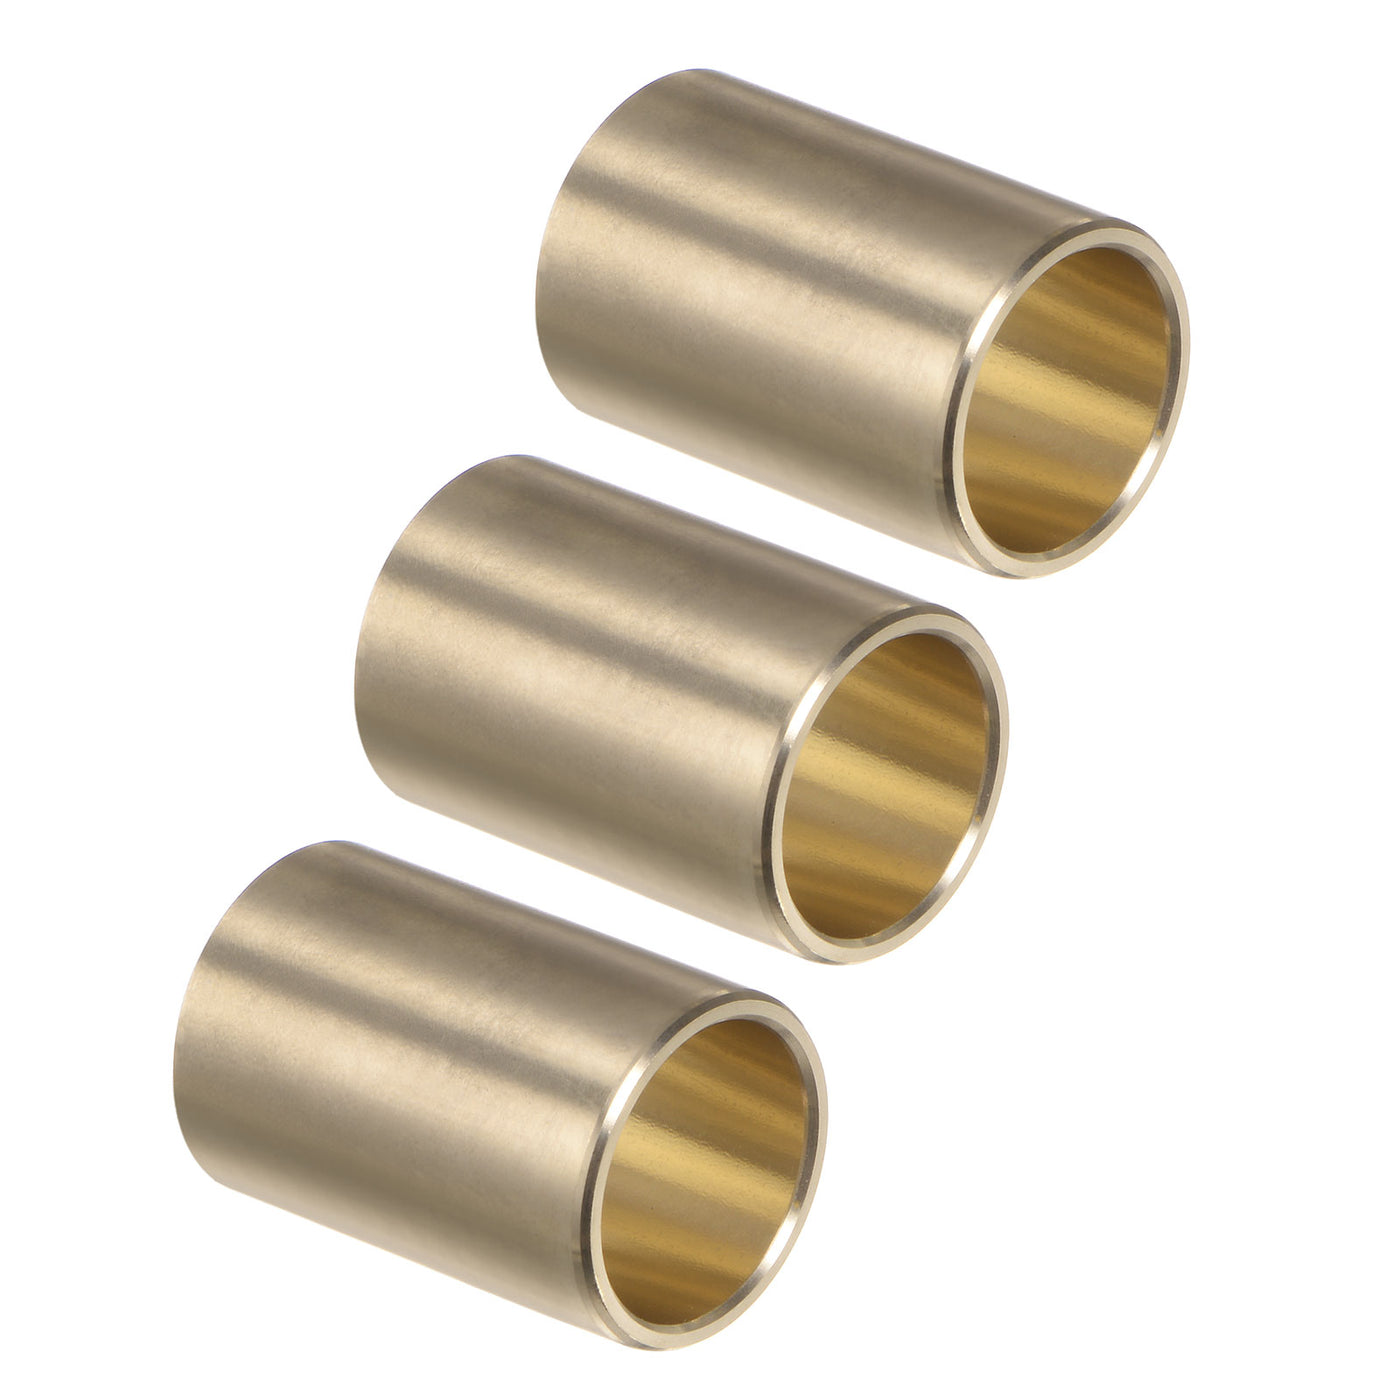 uxcell Uxcell 3pcs Sleeve Bearings 5/8" x 3/4" x 1-1/8" Wrapped Oilless Bushings Cast Brass